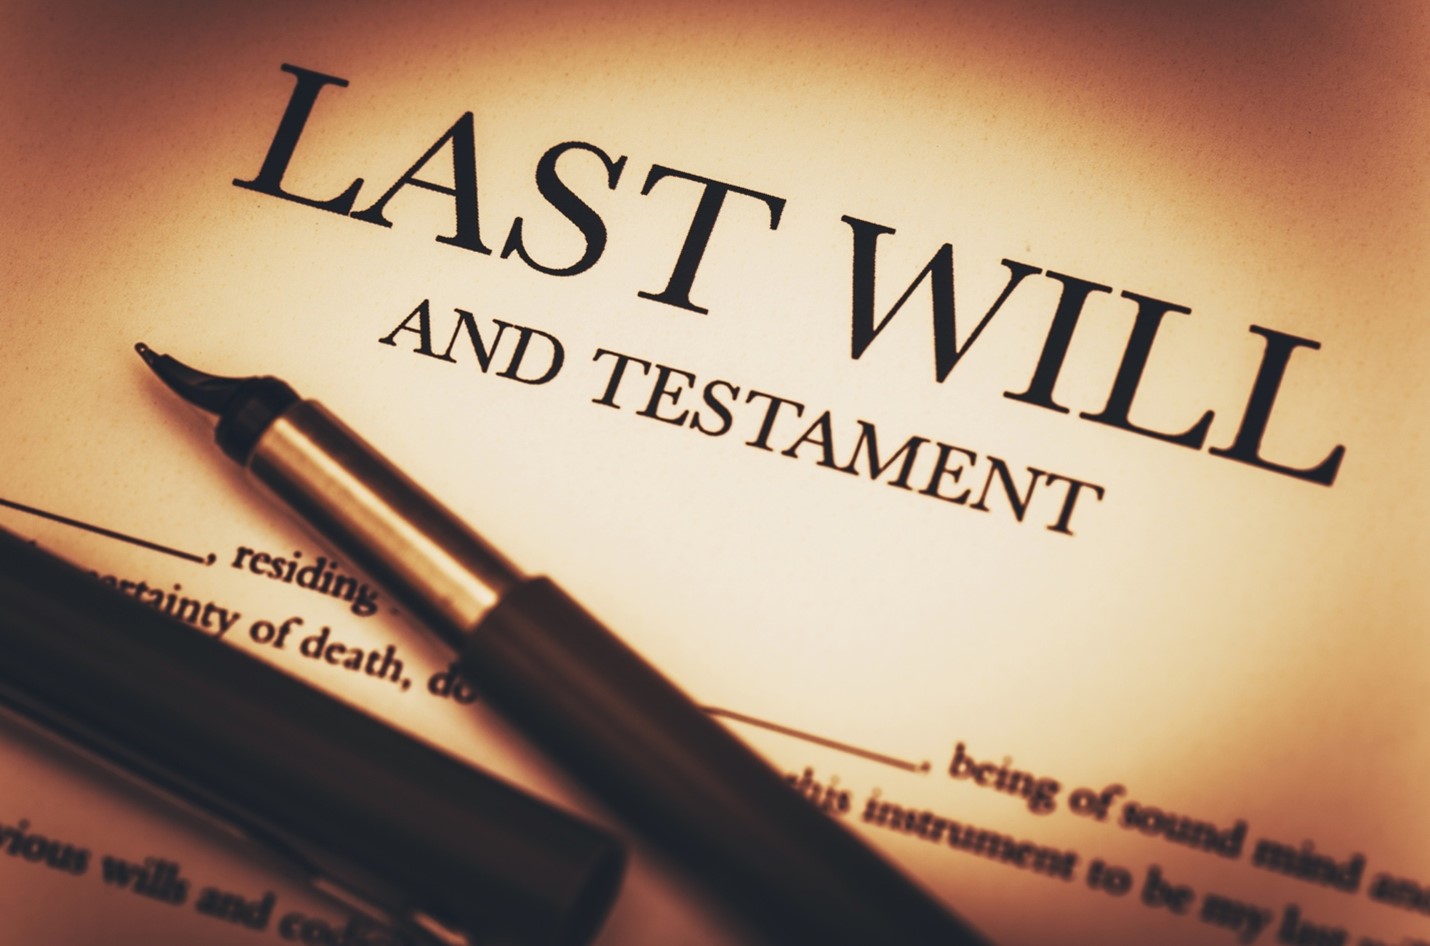 last will and testament with a pen on it